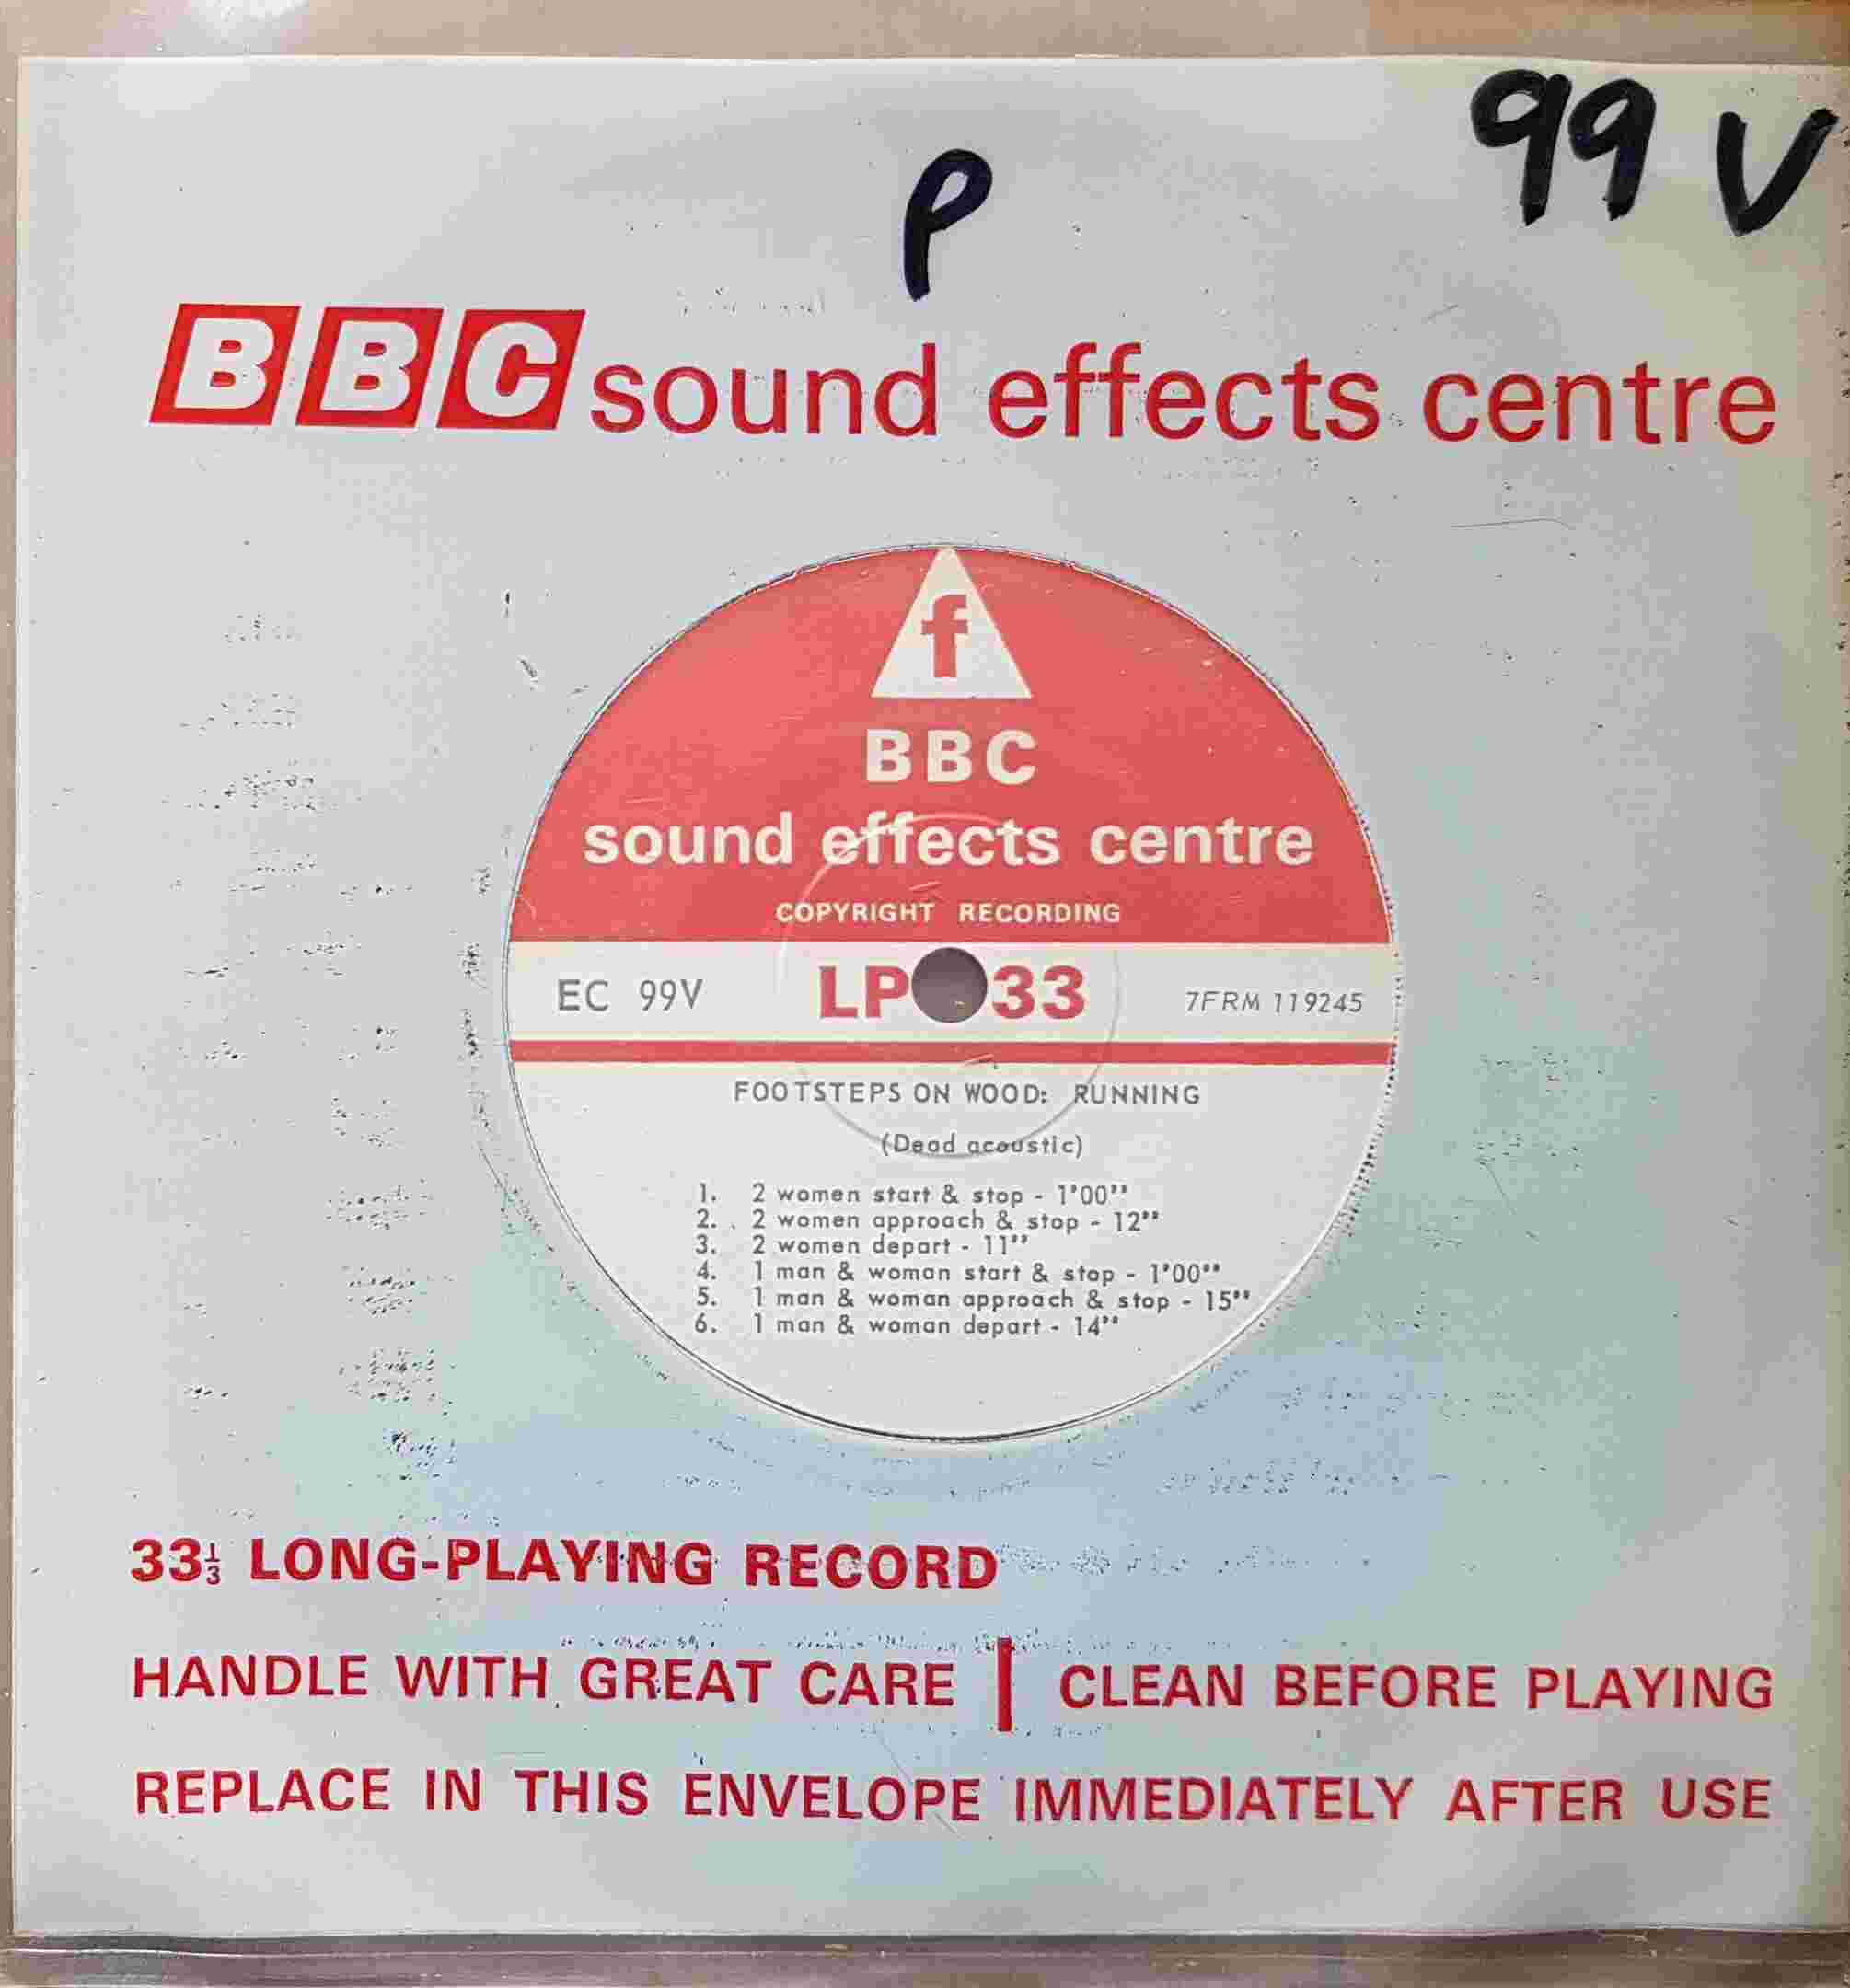 Picture of EC 99V Footsteps on wood: Running (Dead accoustic) by artist Not registered from the BBC singles - Records and Tapes library